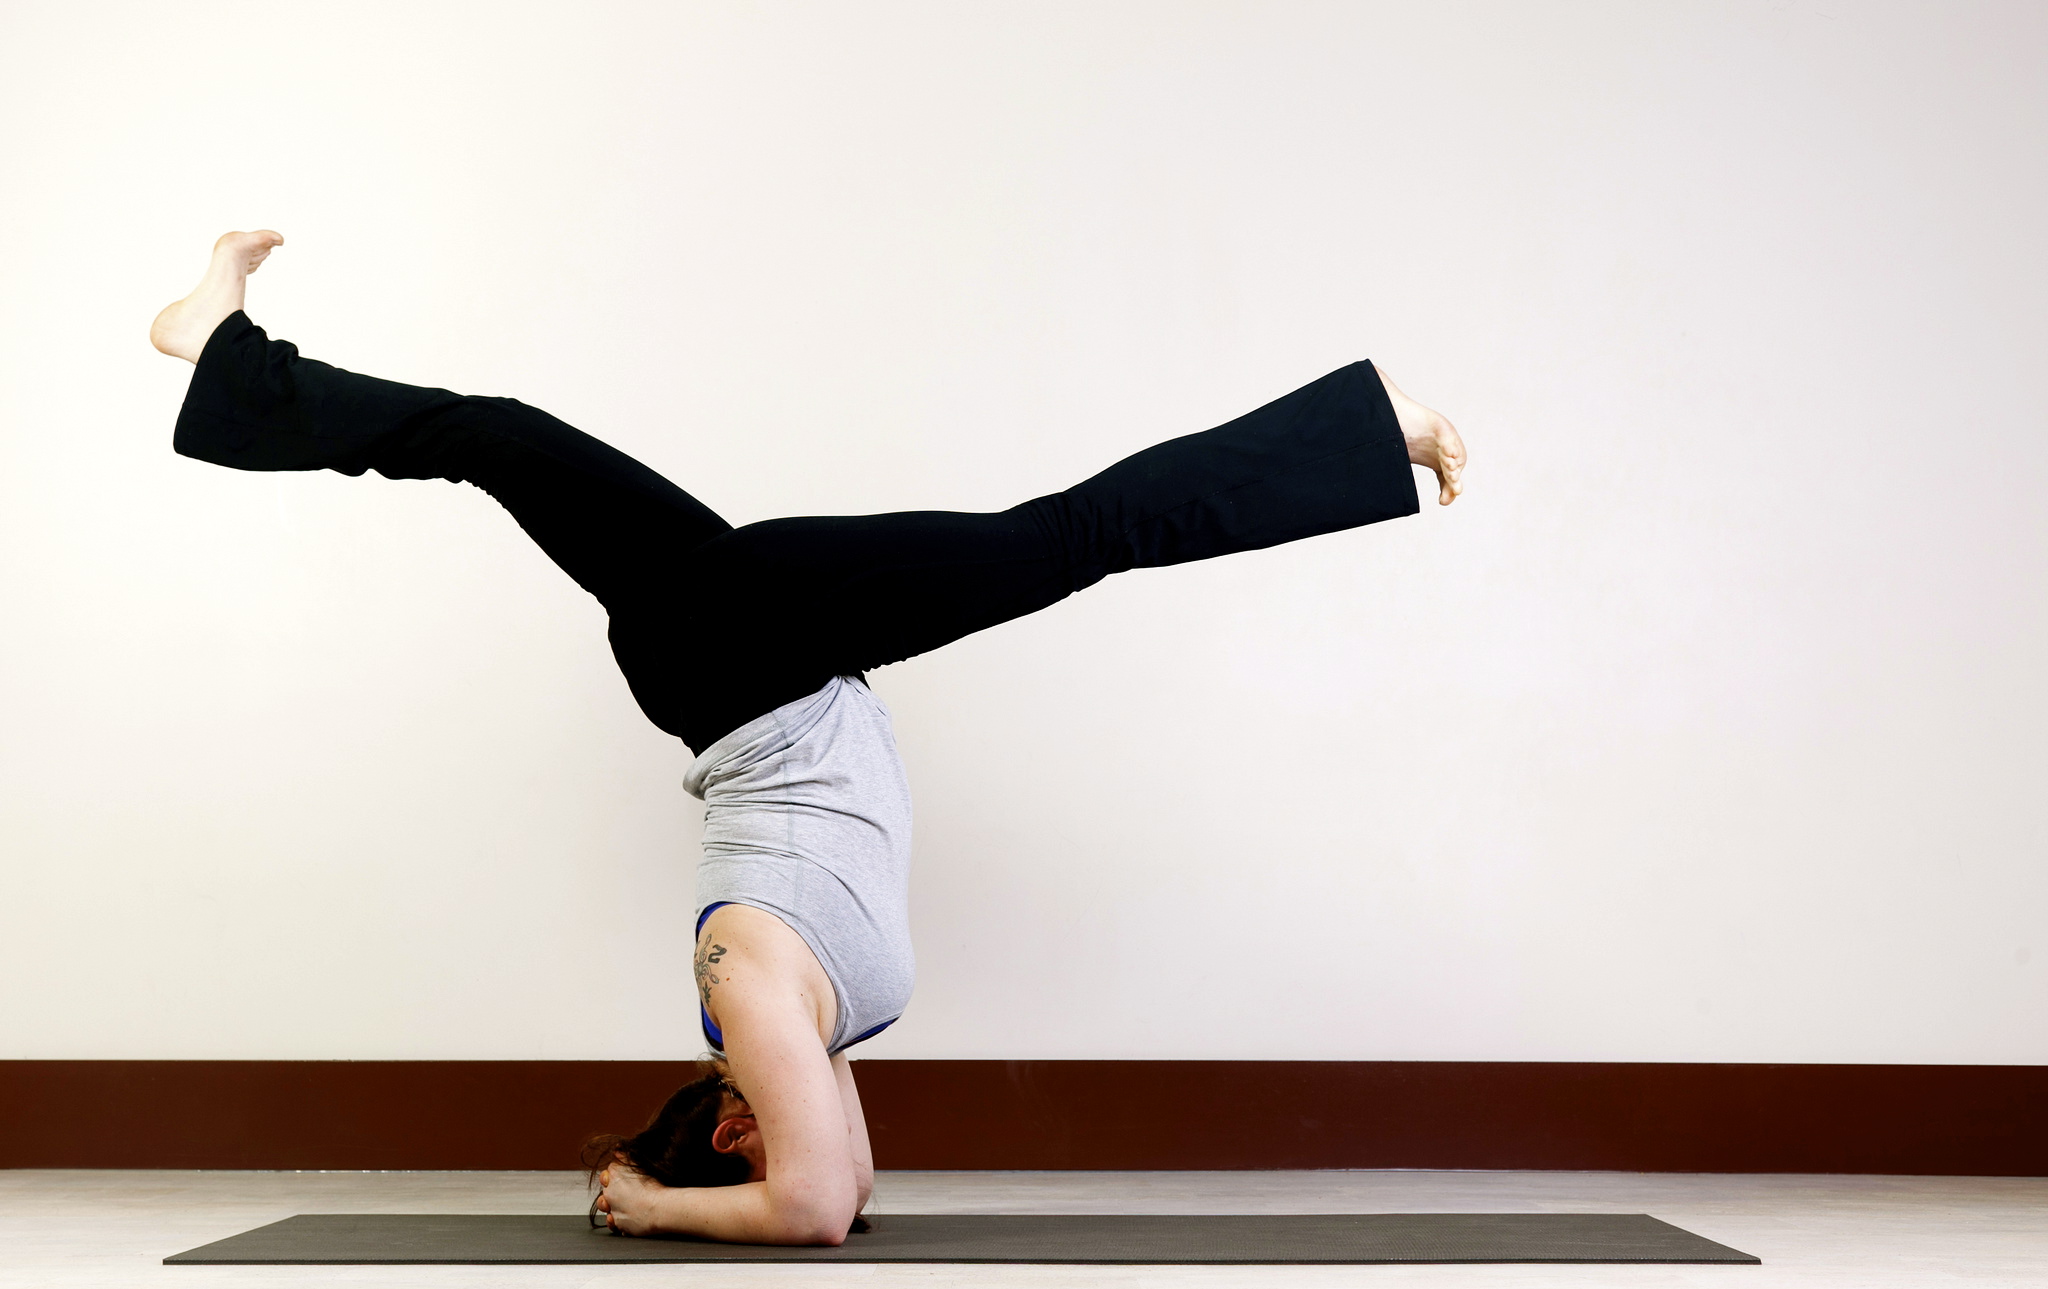 10 Reasons To Do A Headstand Every Day! - An Excerpt From Lisa